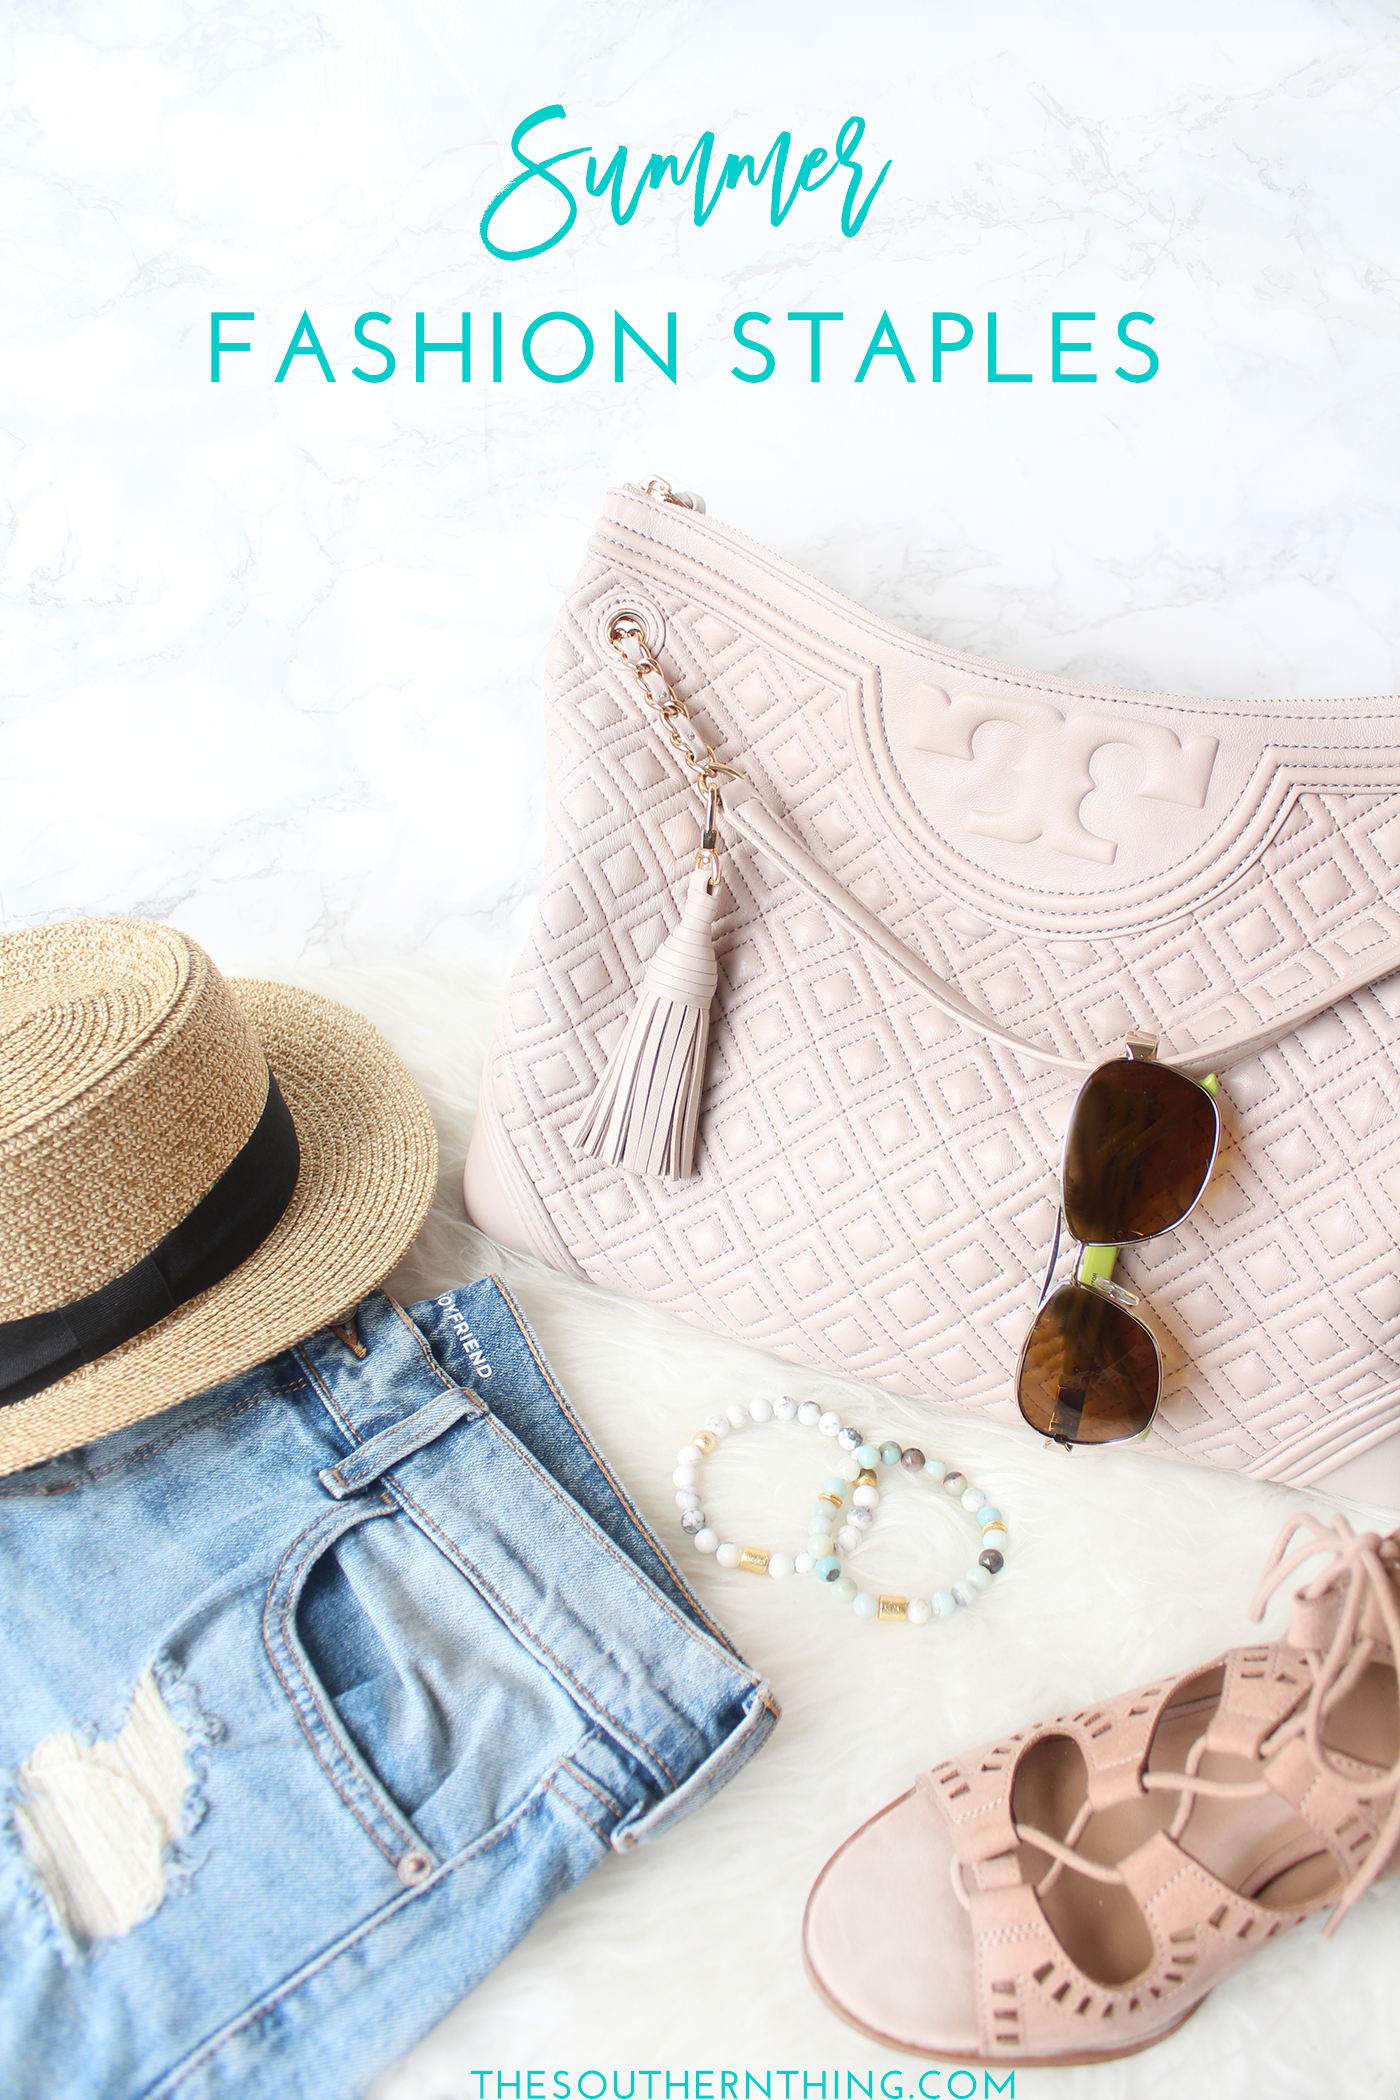 Favorite Summer Fashion Staples - Trendy pieces to add to your closet this summer